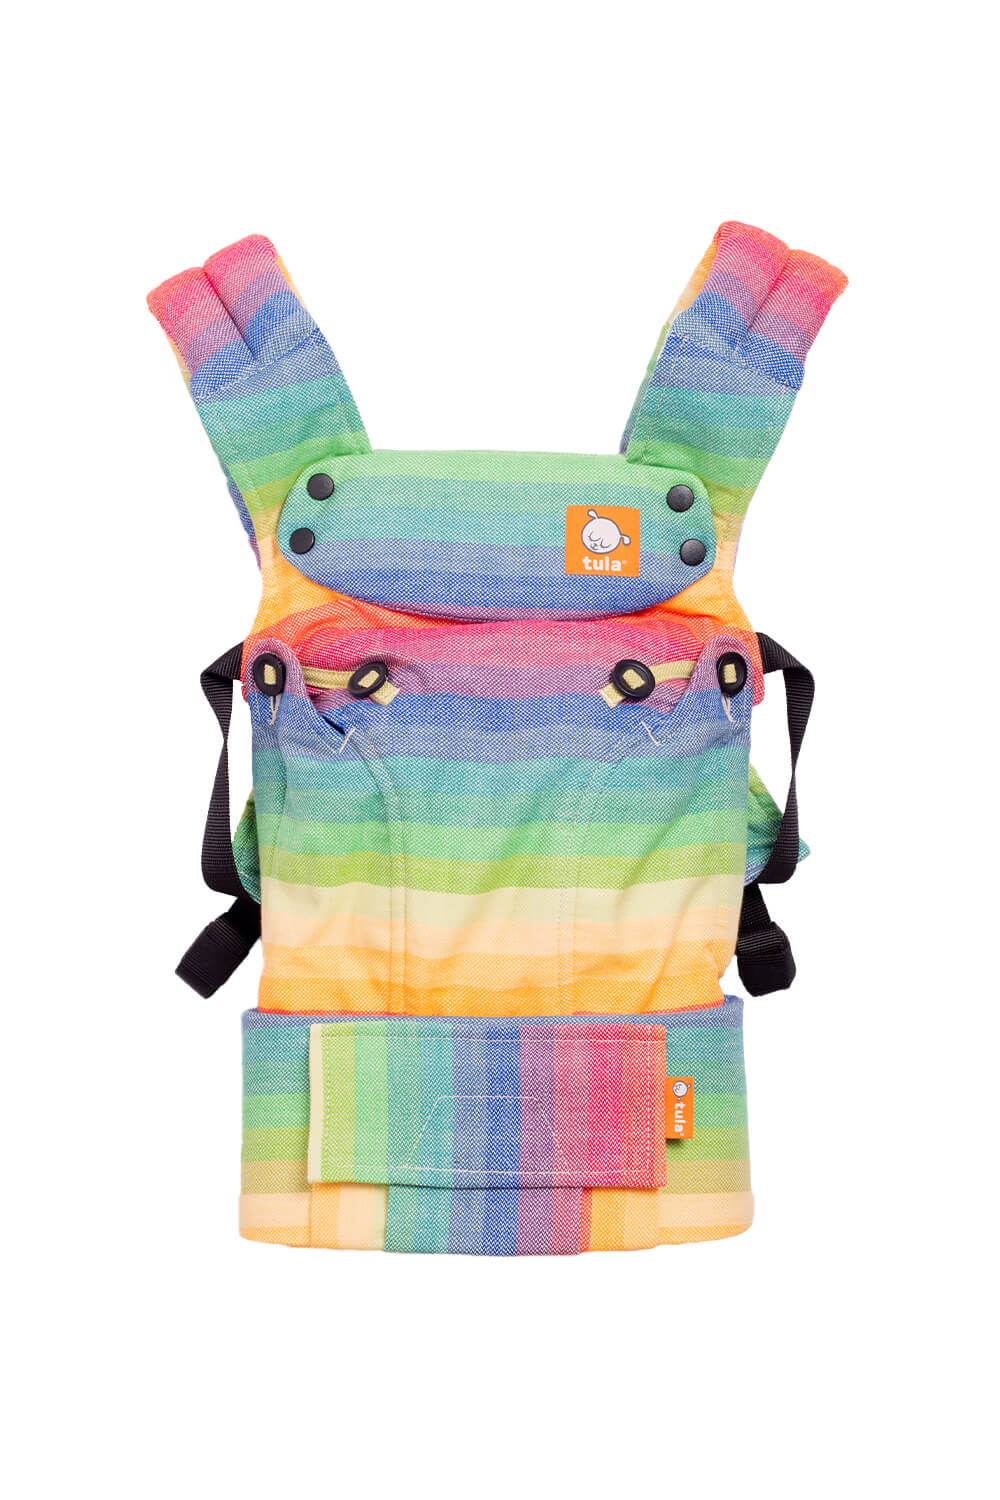 I Missed You - Signature Woven Explore Baby Carrier